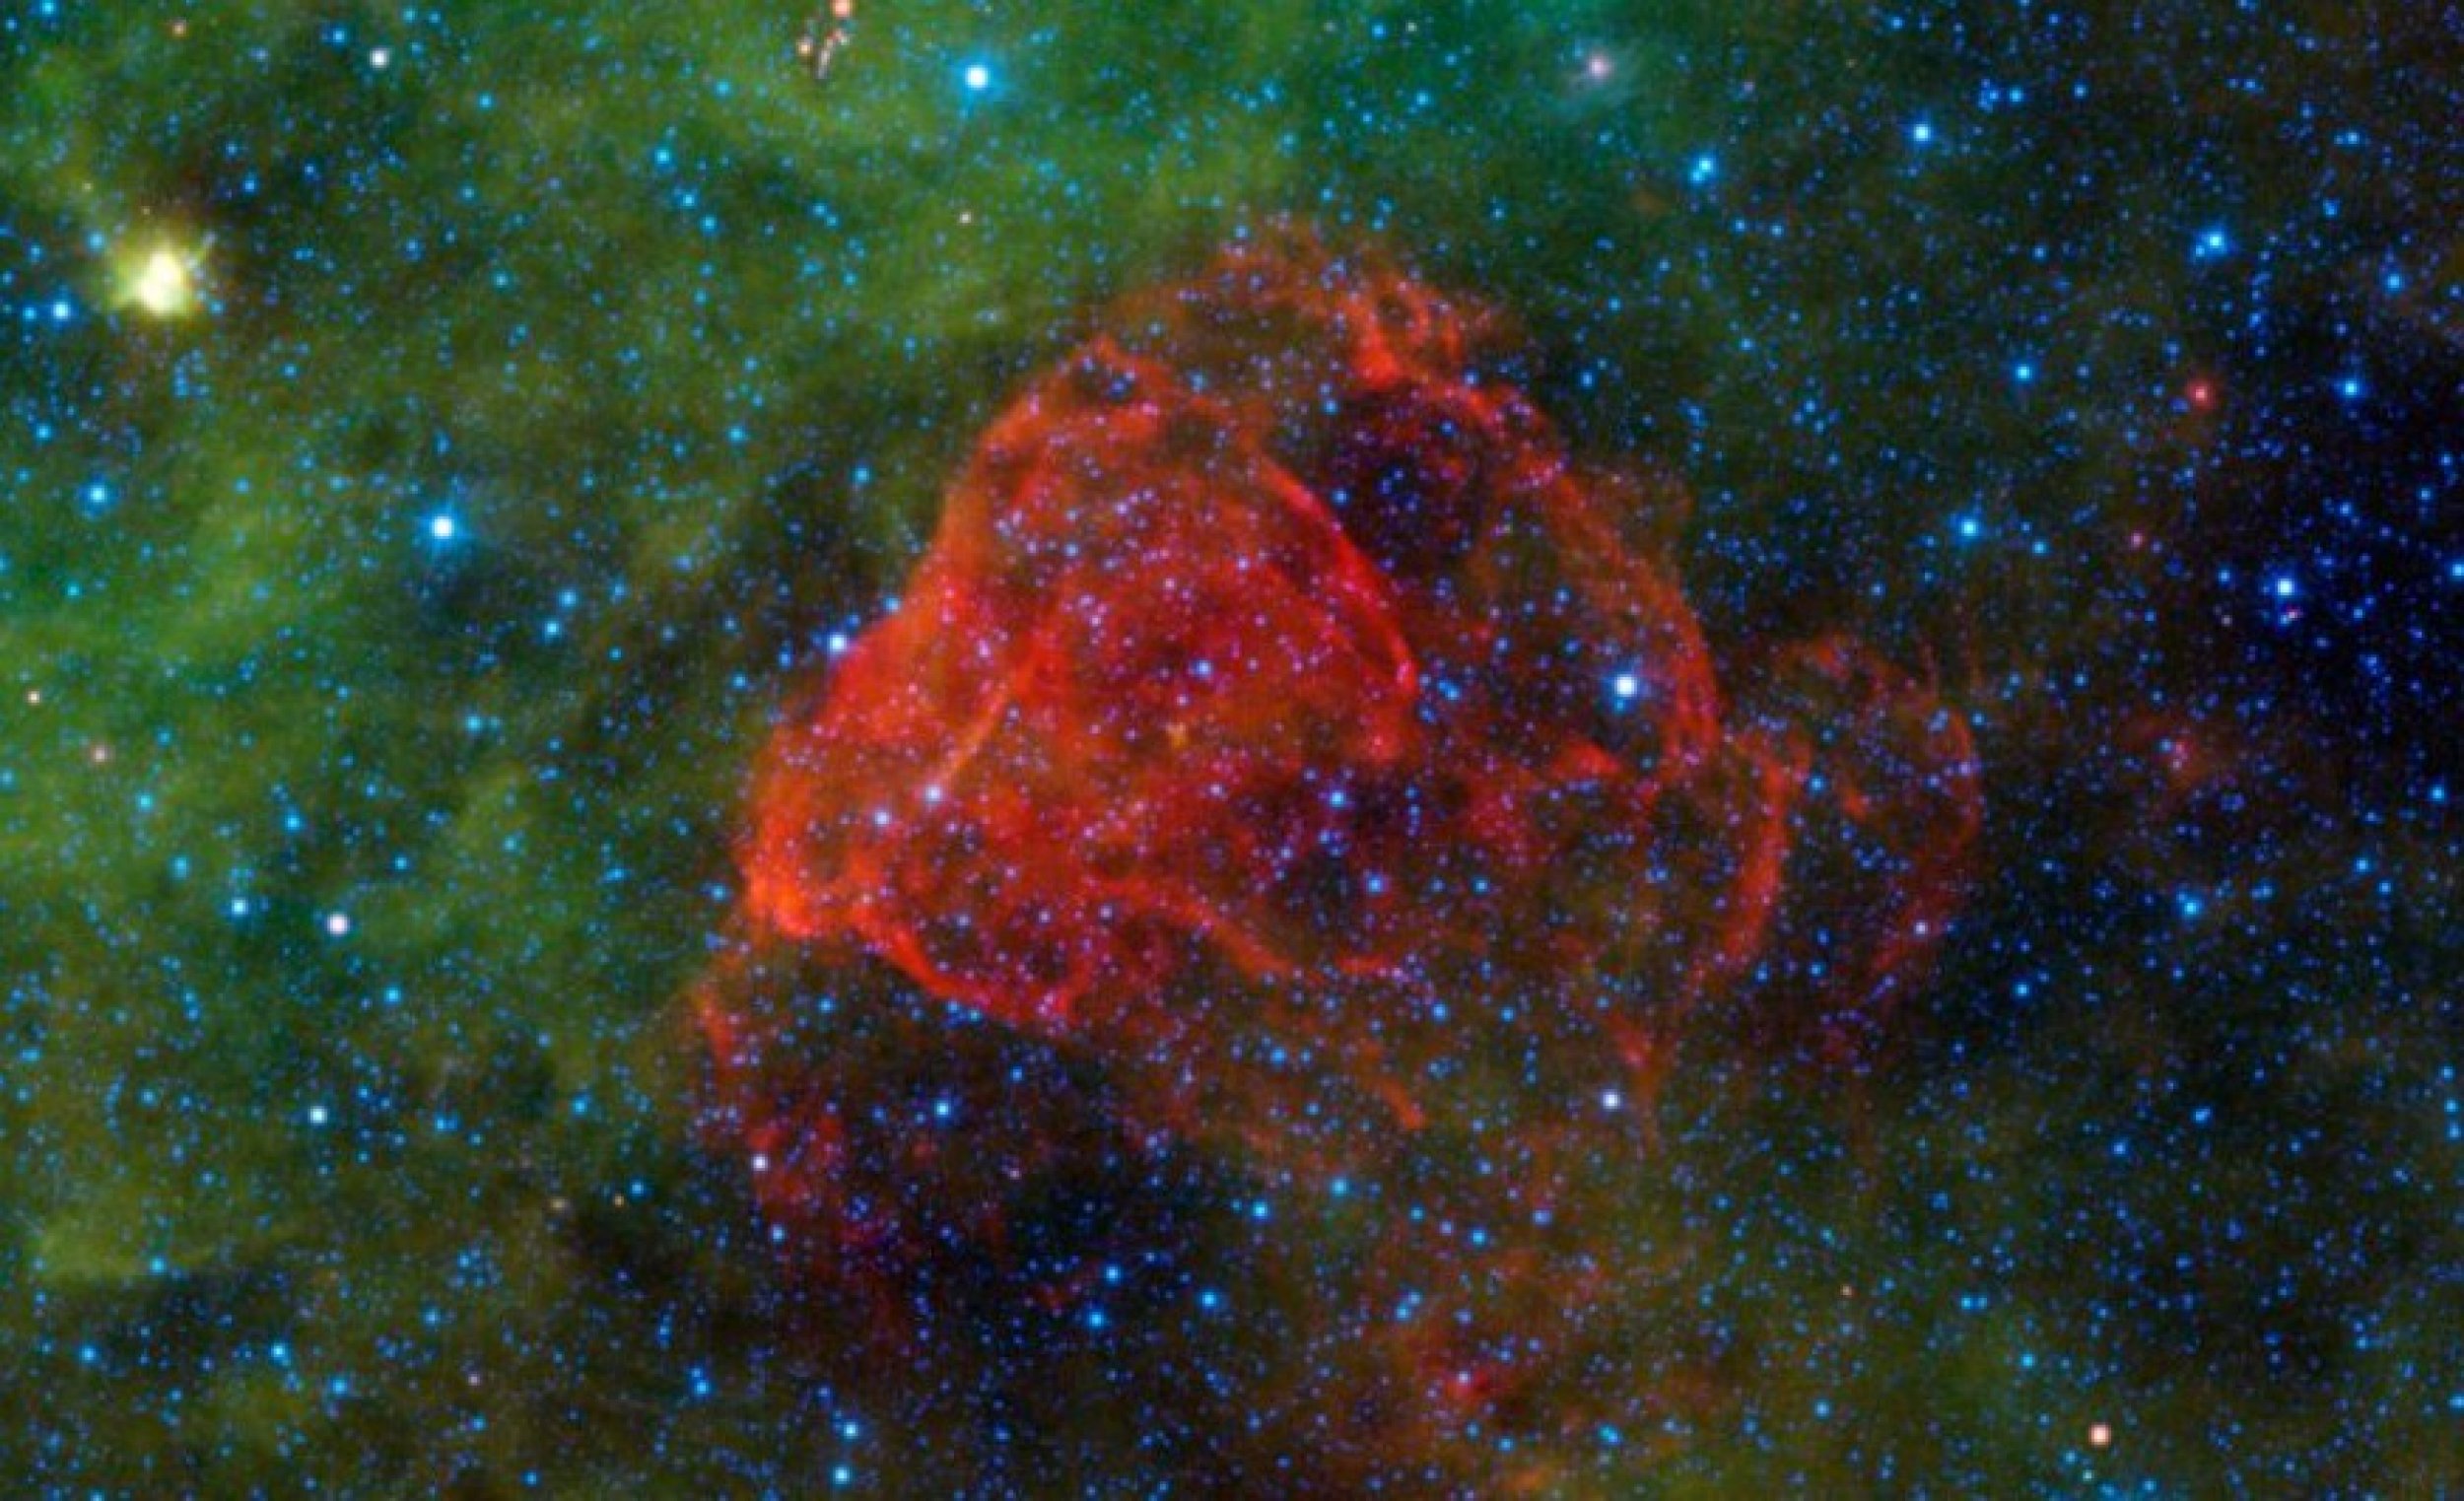 NASA has unveiled an image of a supernova remantSNR called 039Puppis A039 which contains rosy dust and gas.